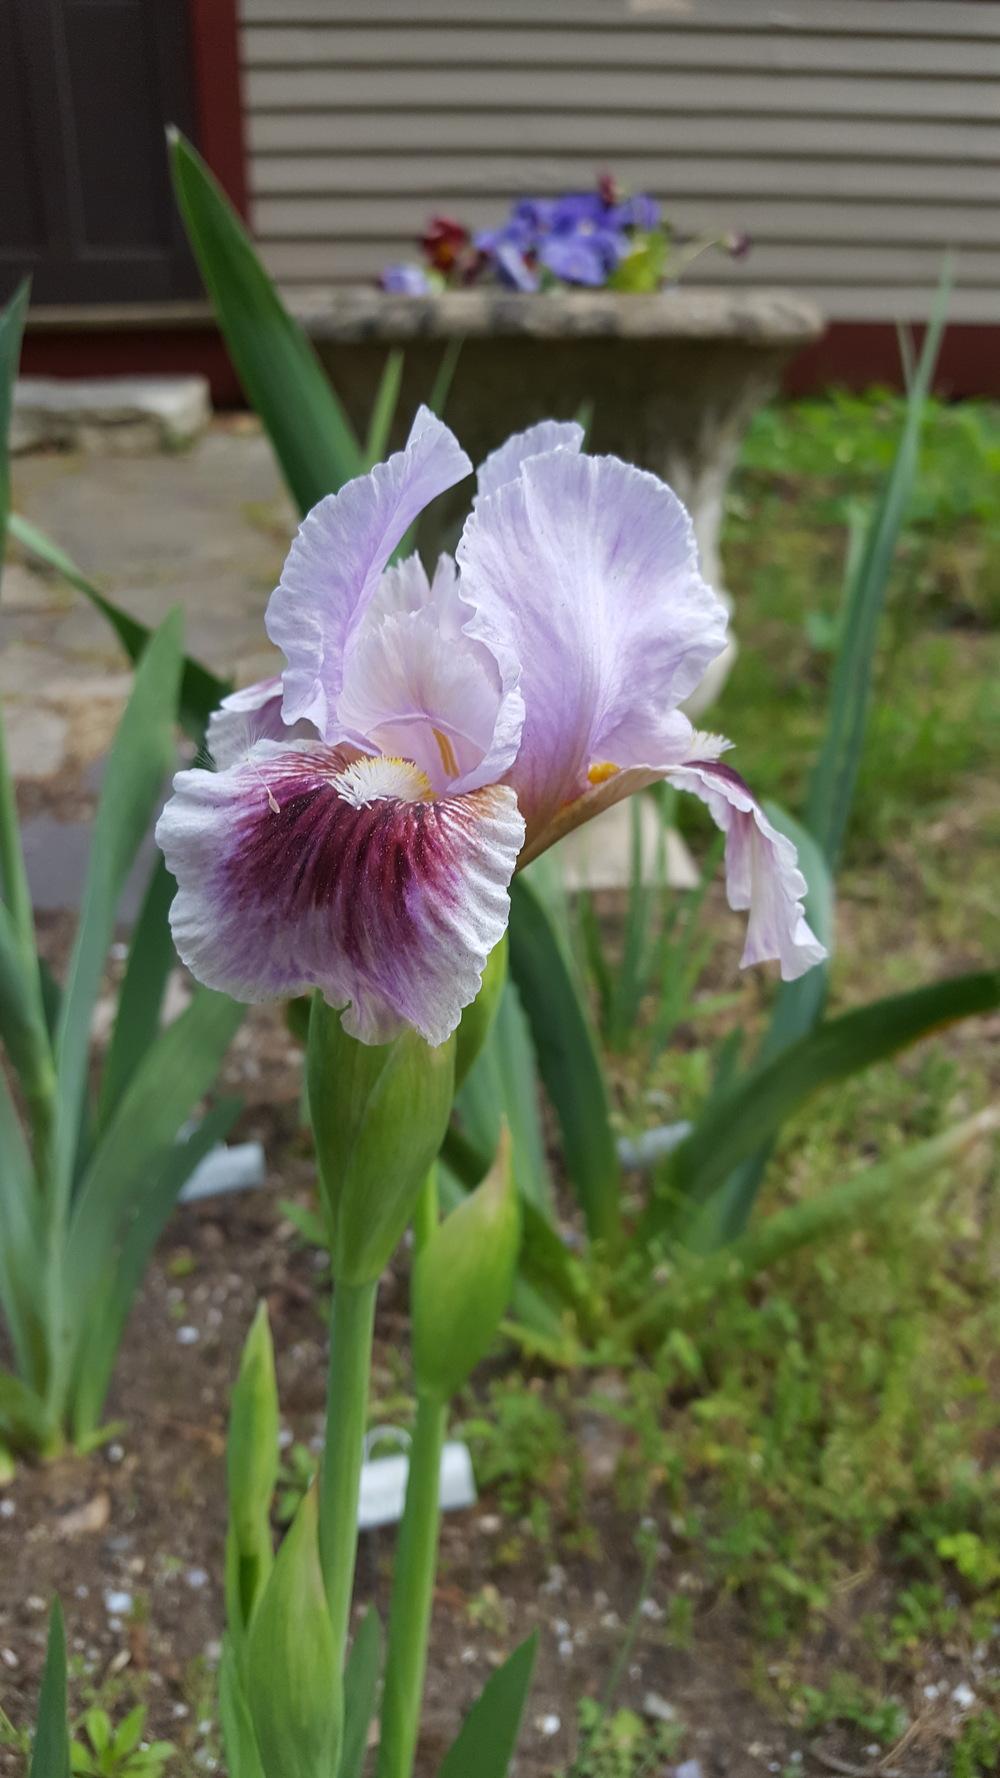 Photo of Arilbred Iris (Iris 'Free as the Wind') uploaded by Dachsylady86